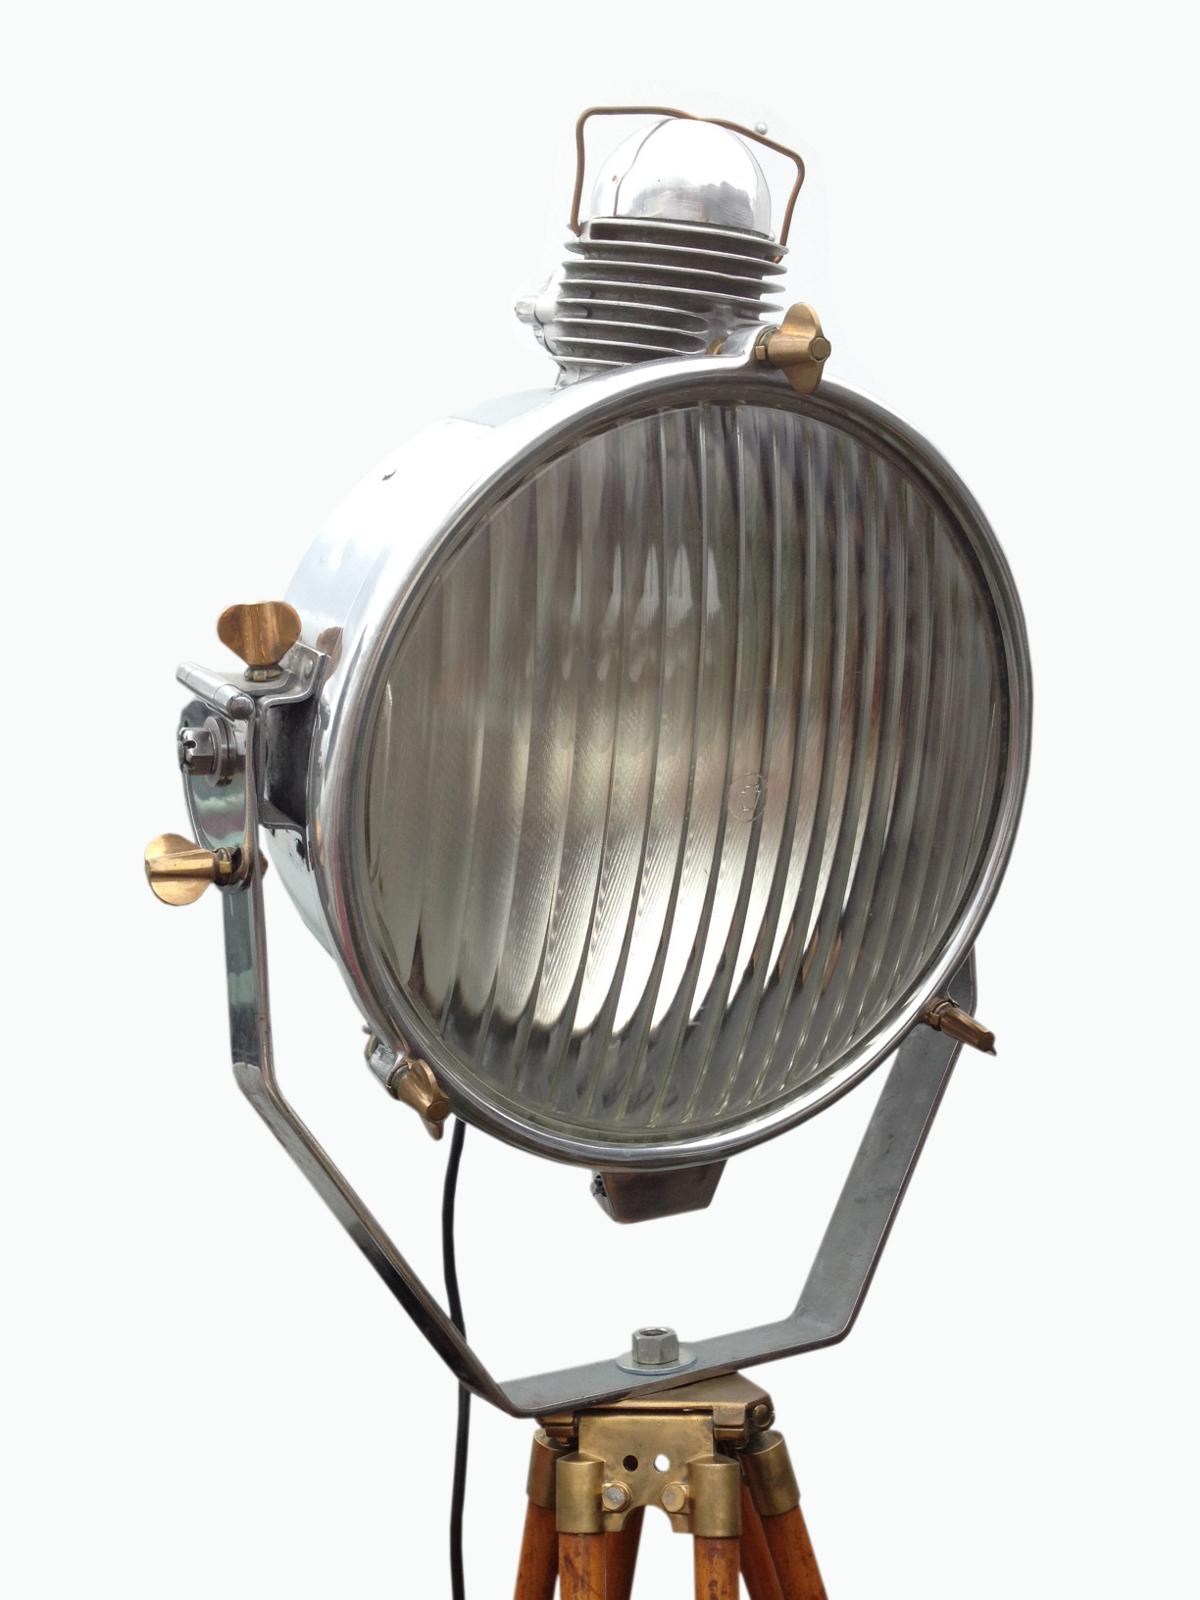 A fine example of reutilization of an old locomotive headlight from a Pennsylvania Train. Converted in a chromed metal floodlight with an adjustable oak wooden tripod and aluminum feet. USA 1890 ca.